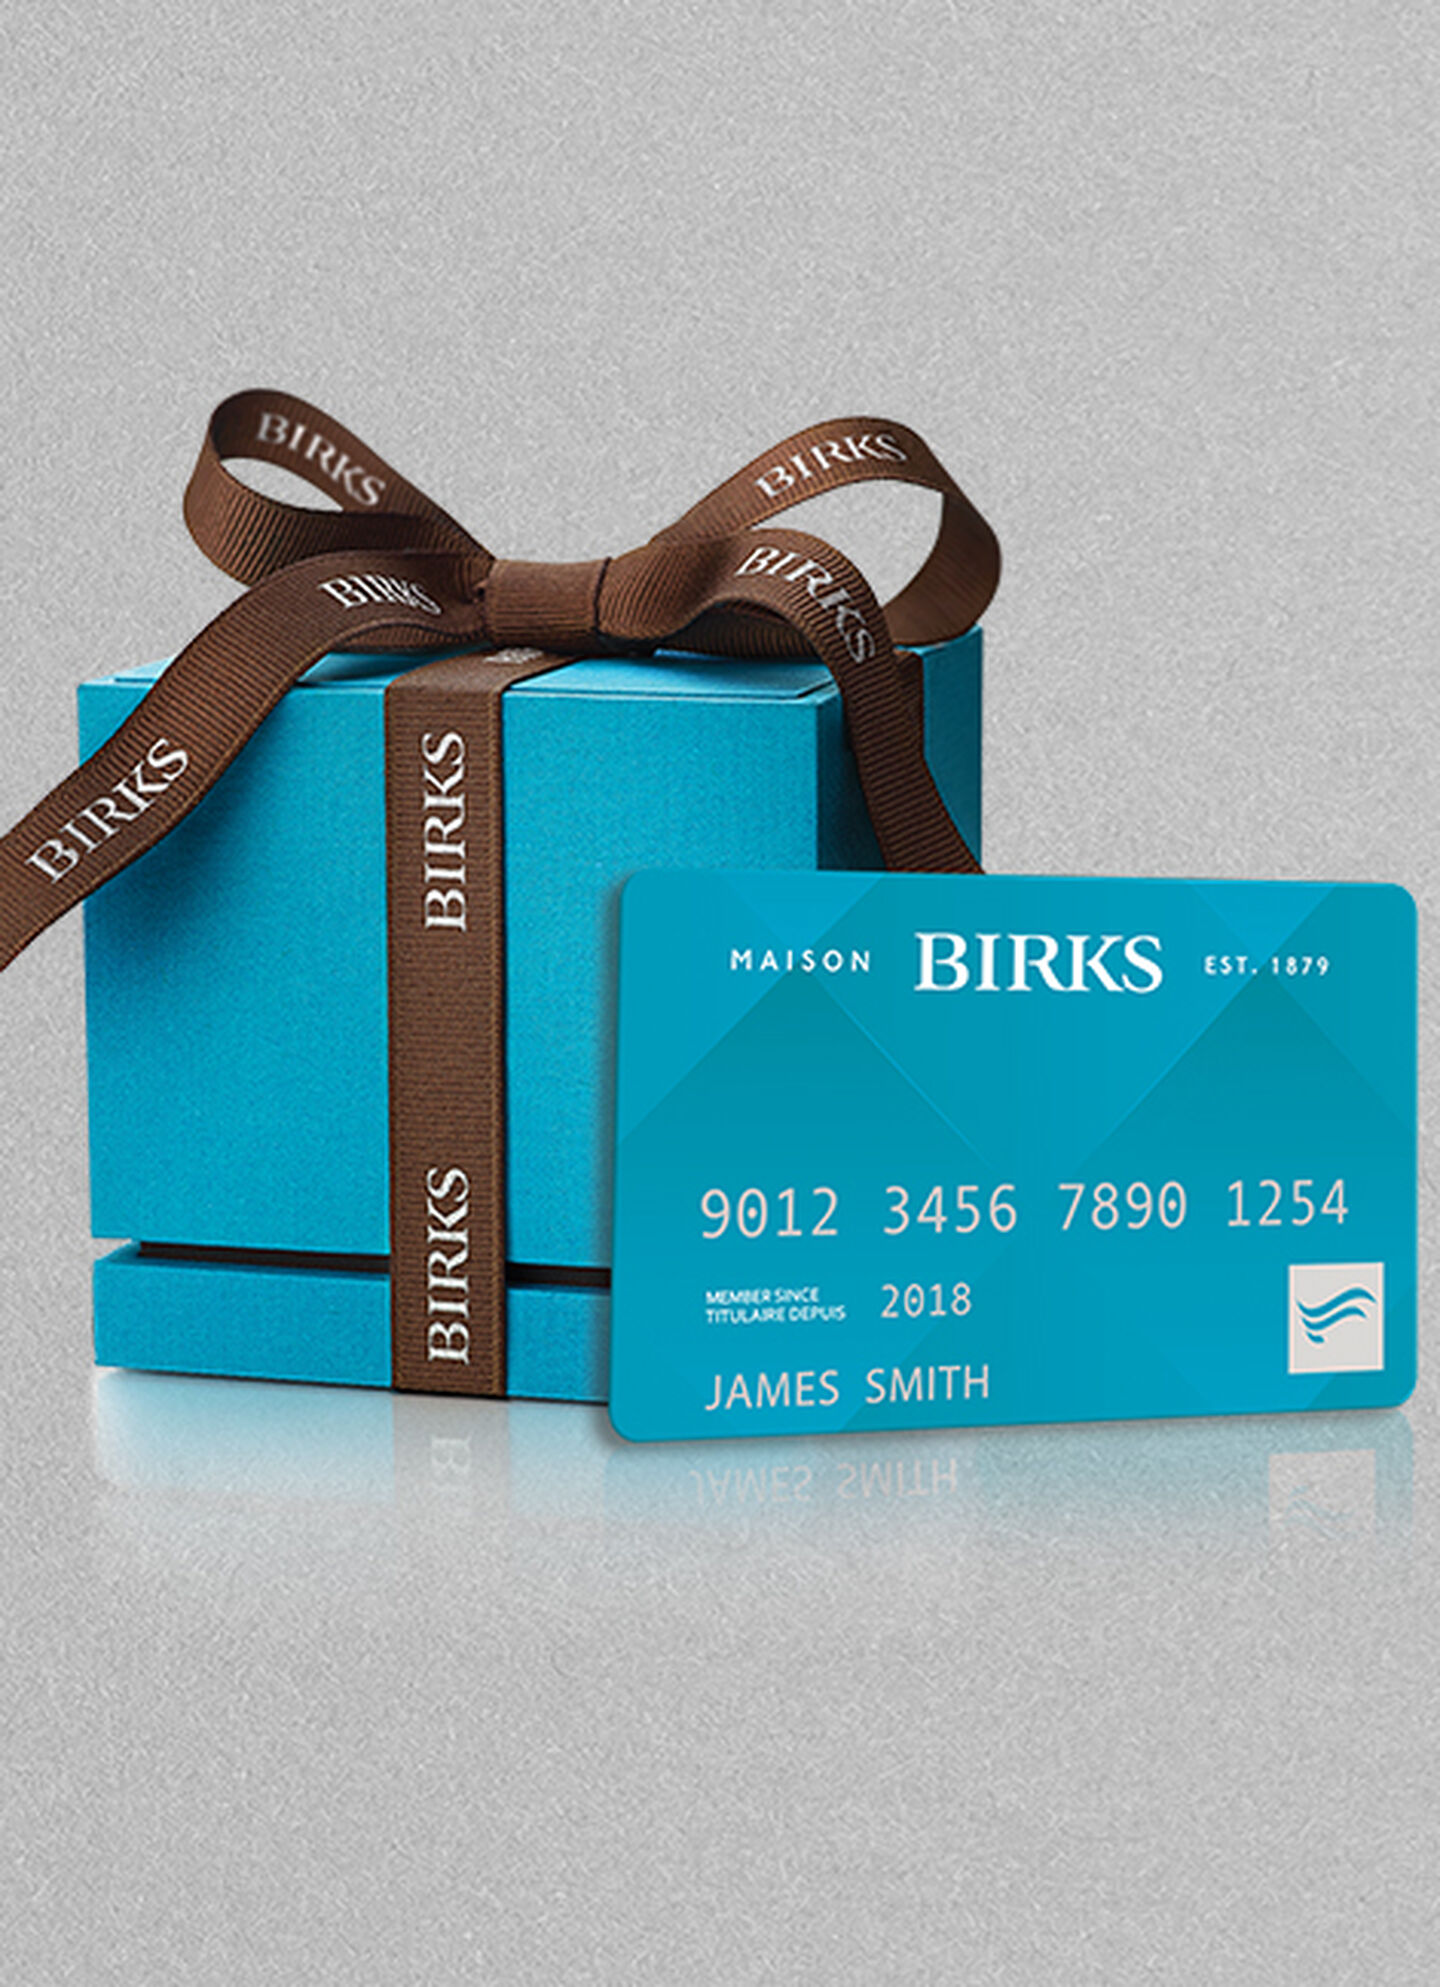 Maison Birks Signature Blue Box wrapped in brown ribbon and Maison Birks Flexiti card